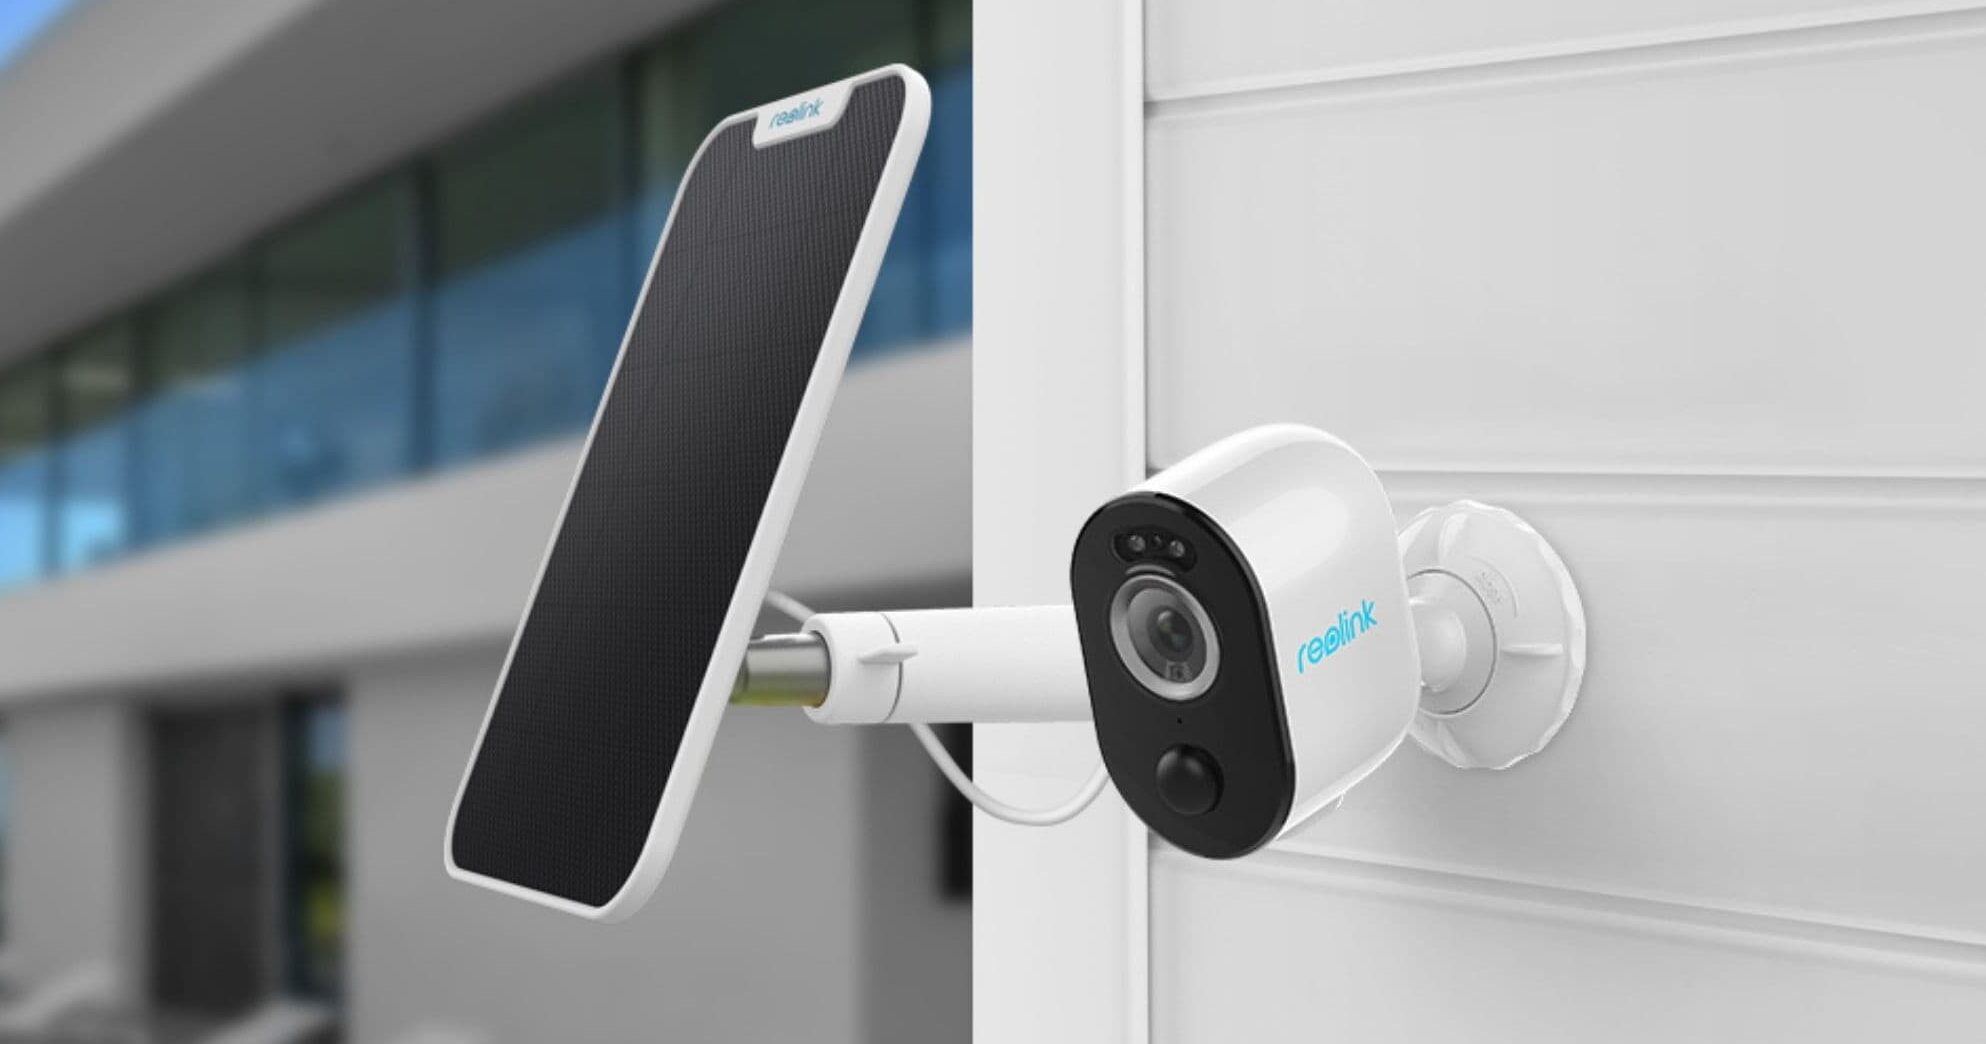 Best Security Cameras without WiFi or Internet Solutions [NEW]